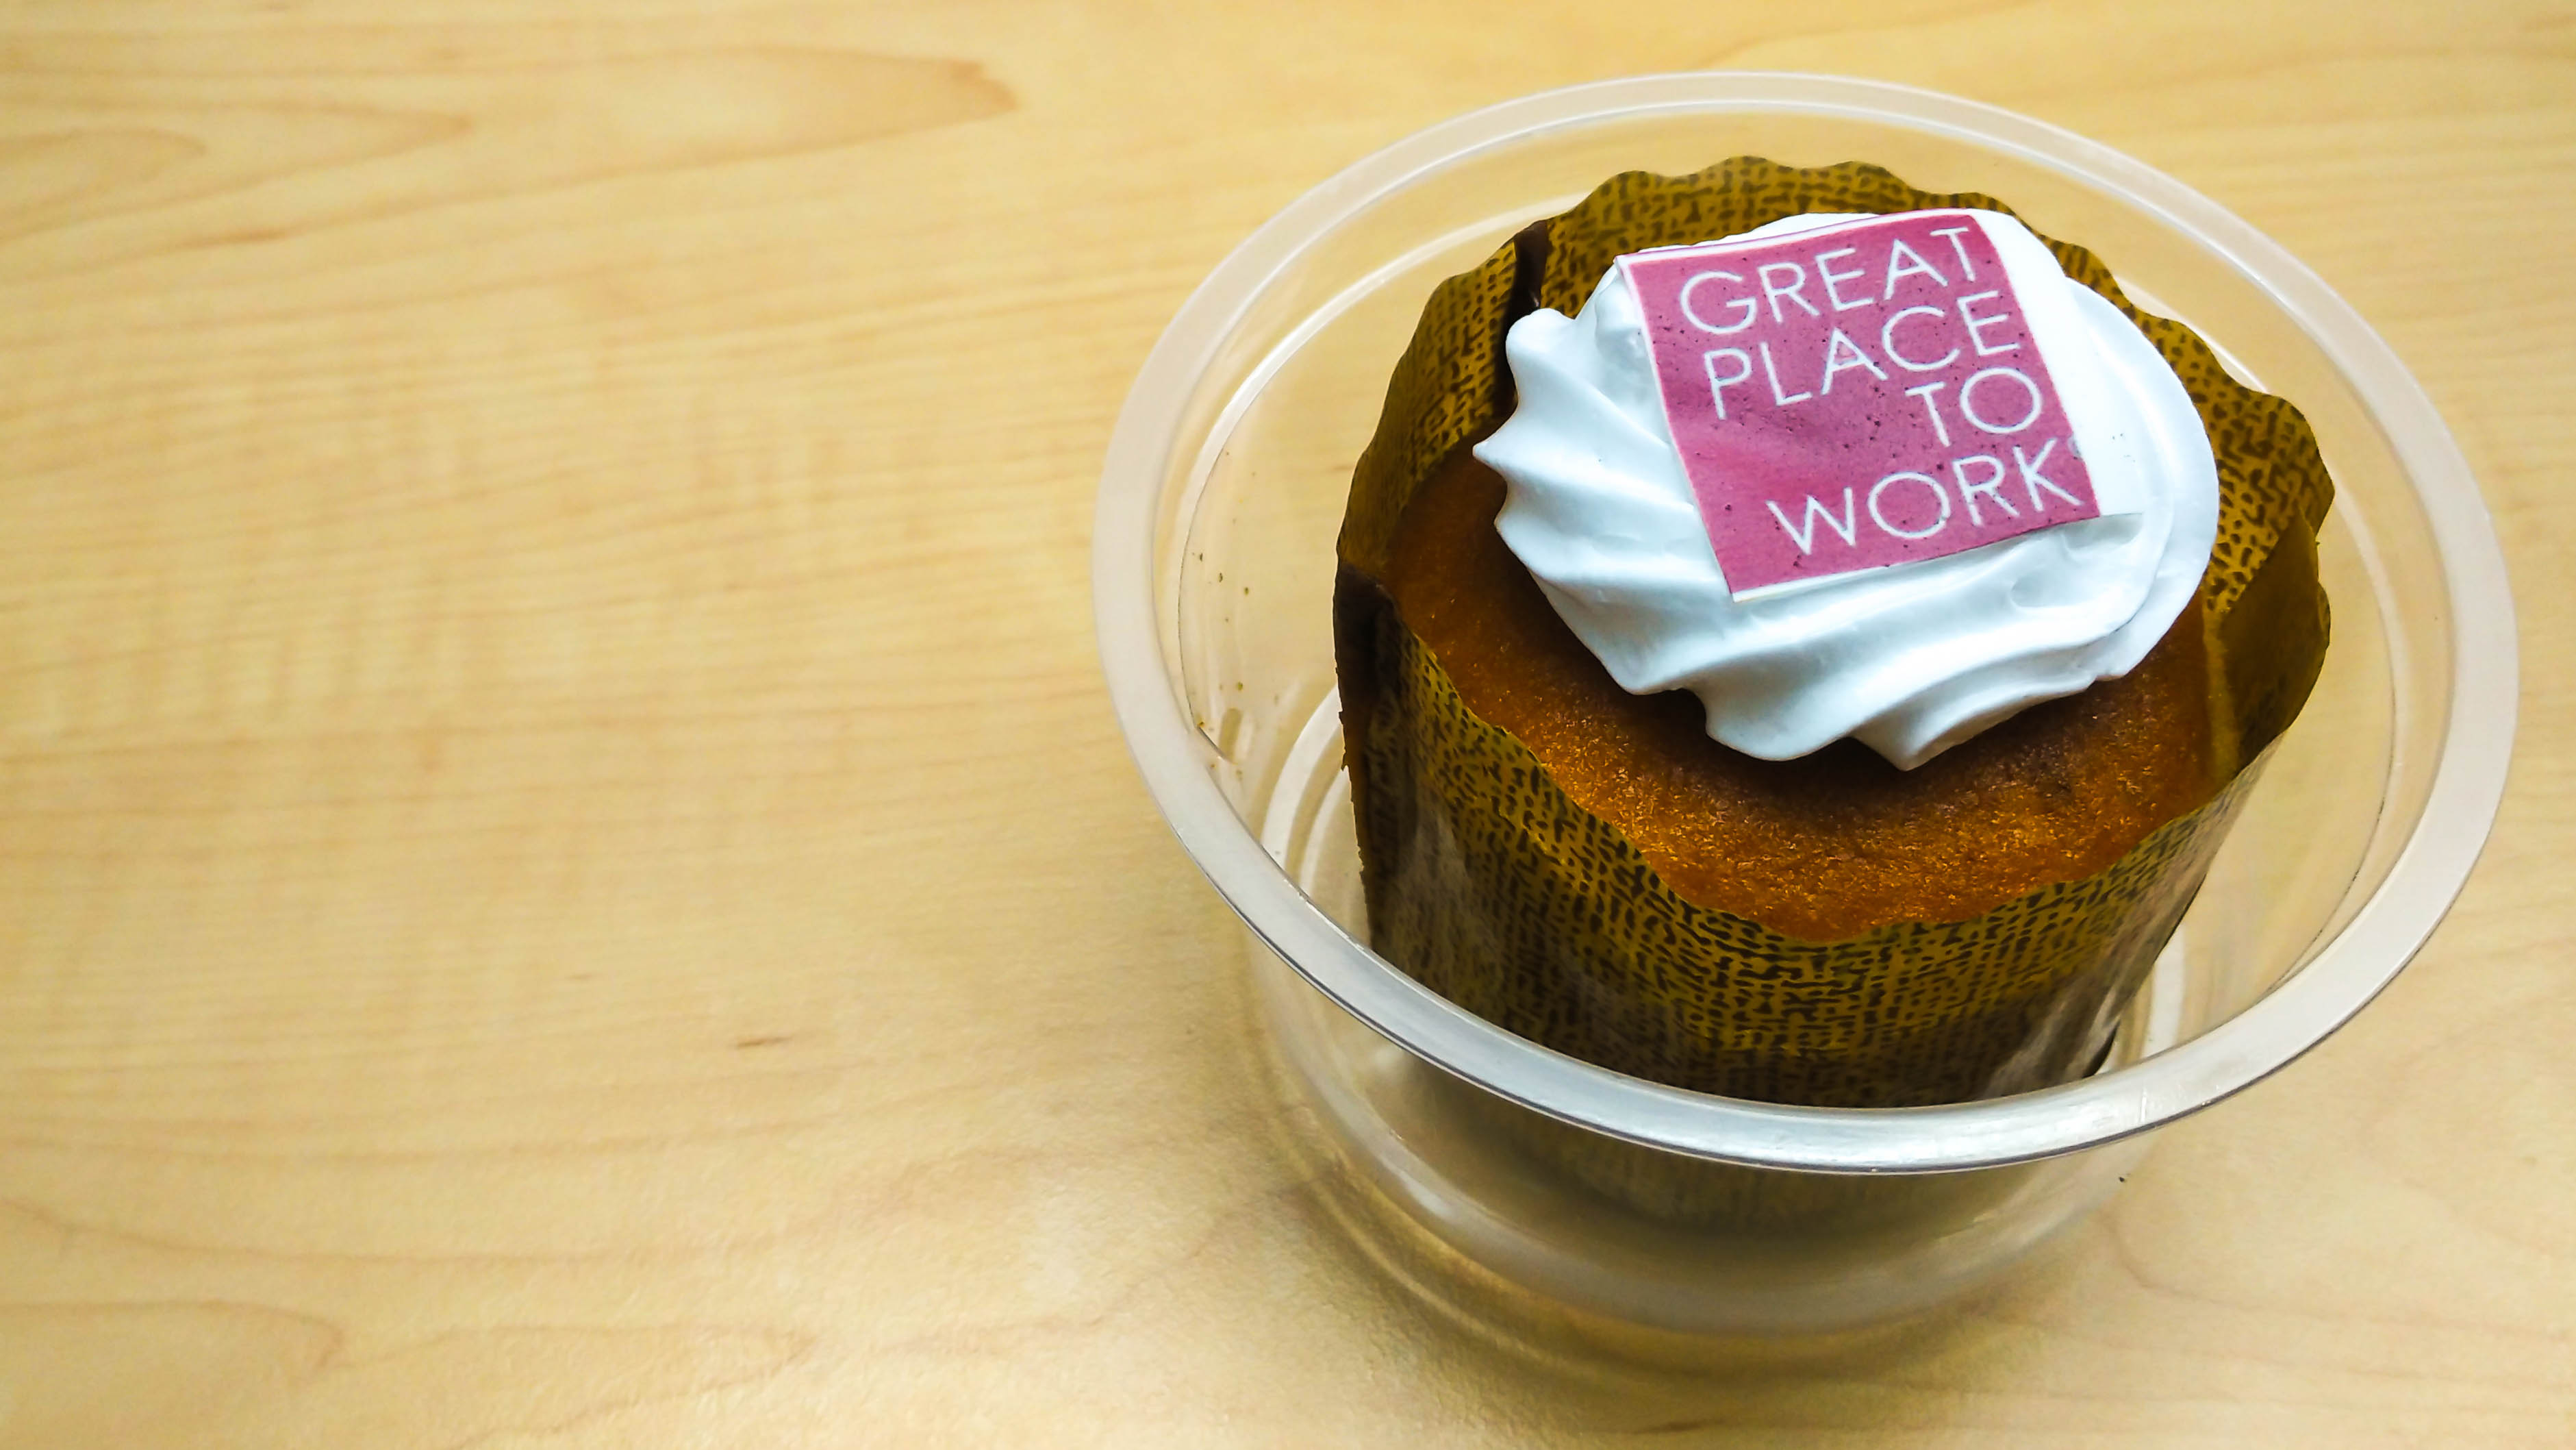 image of a cupcake with a great place to work message on it